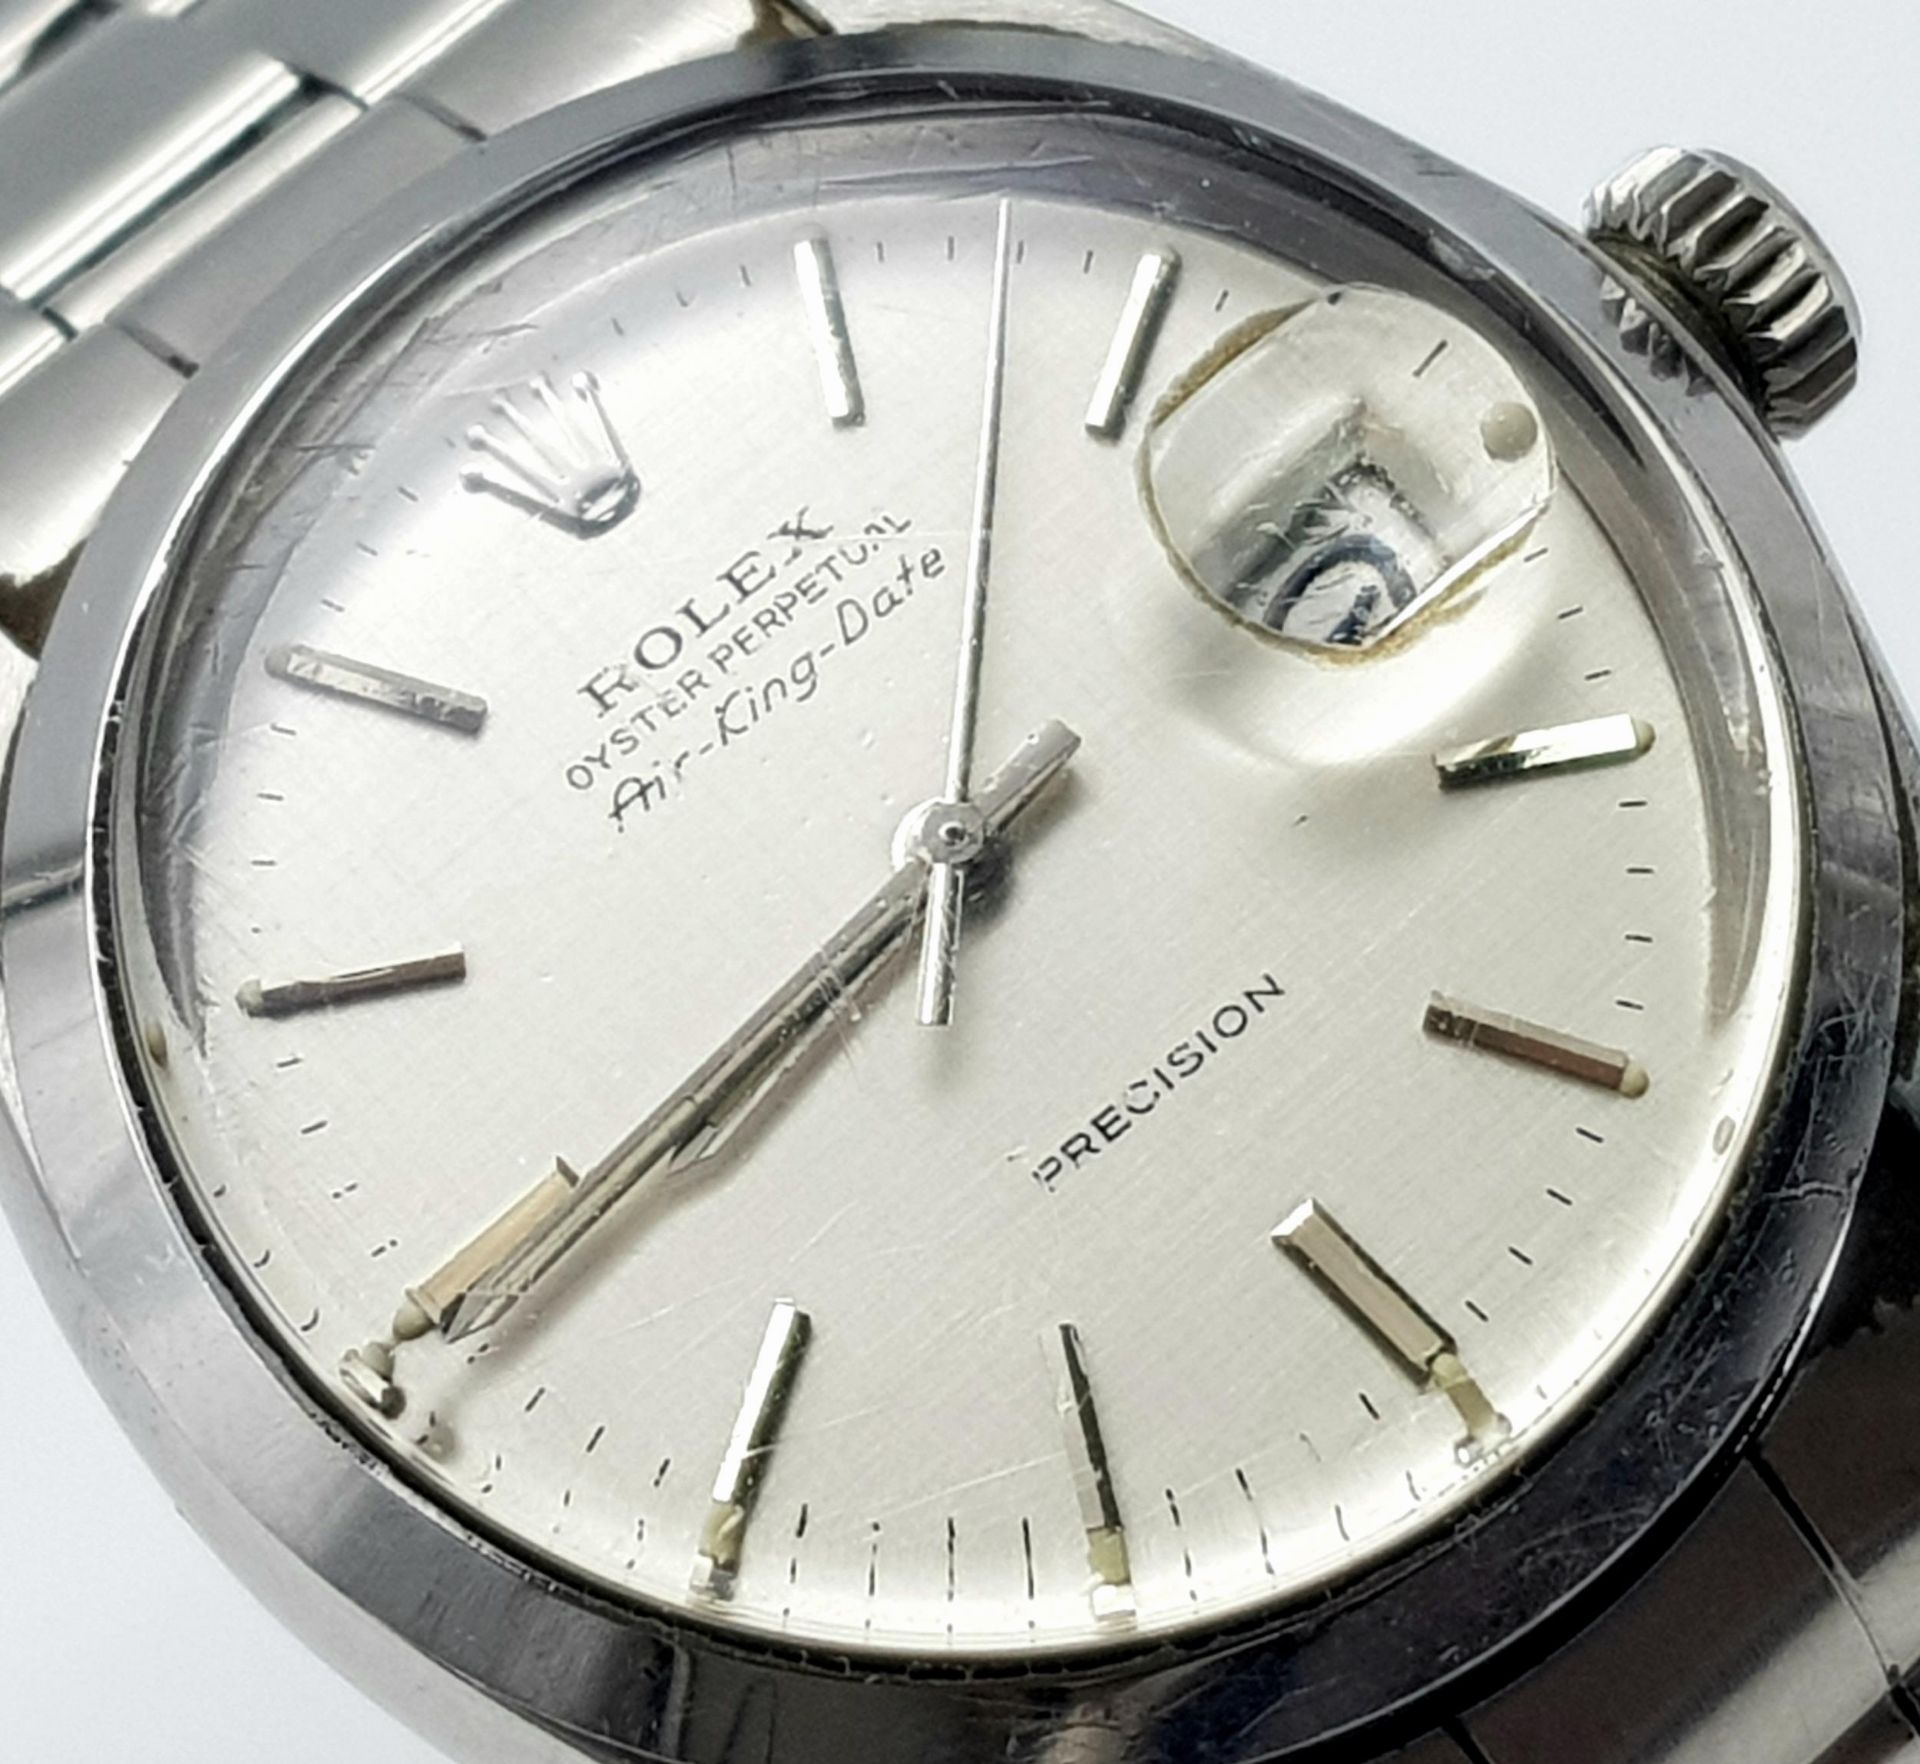 A Vintage Rolex Air King Mid Size Automatic Watch. Stainless steel bracelet and case - 35mm. - Image 3 of 8